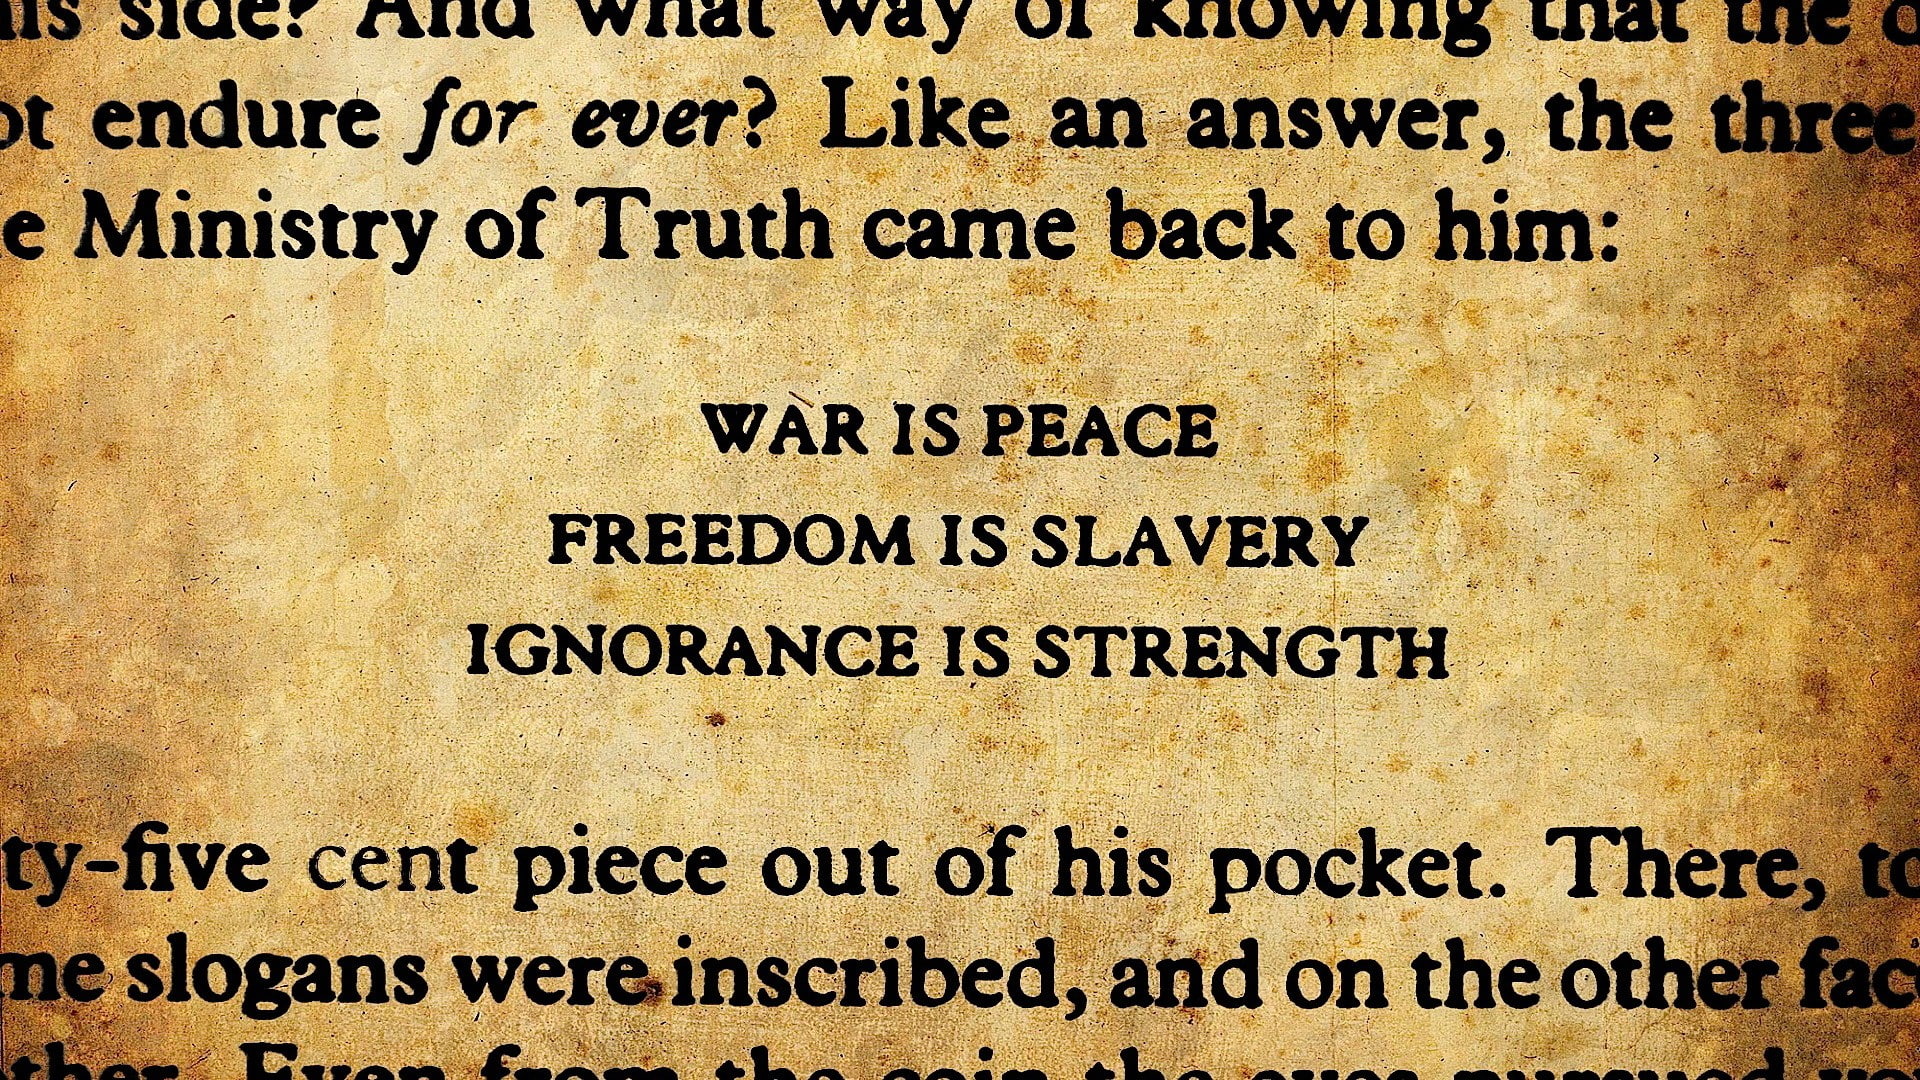 1984, George Orwell, quote, text, communication, no people